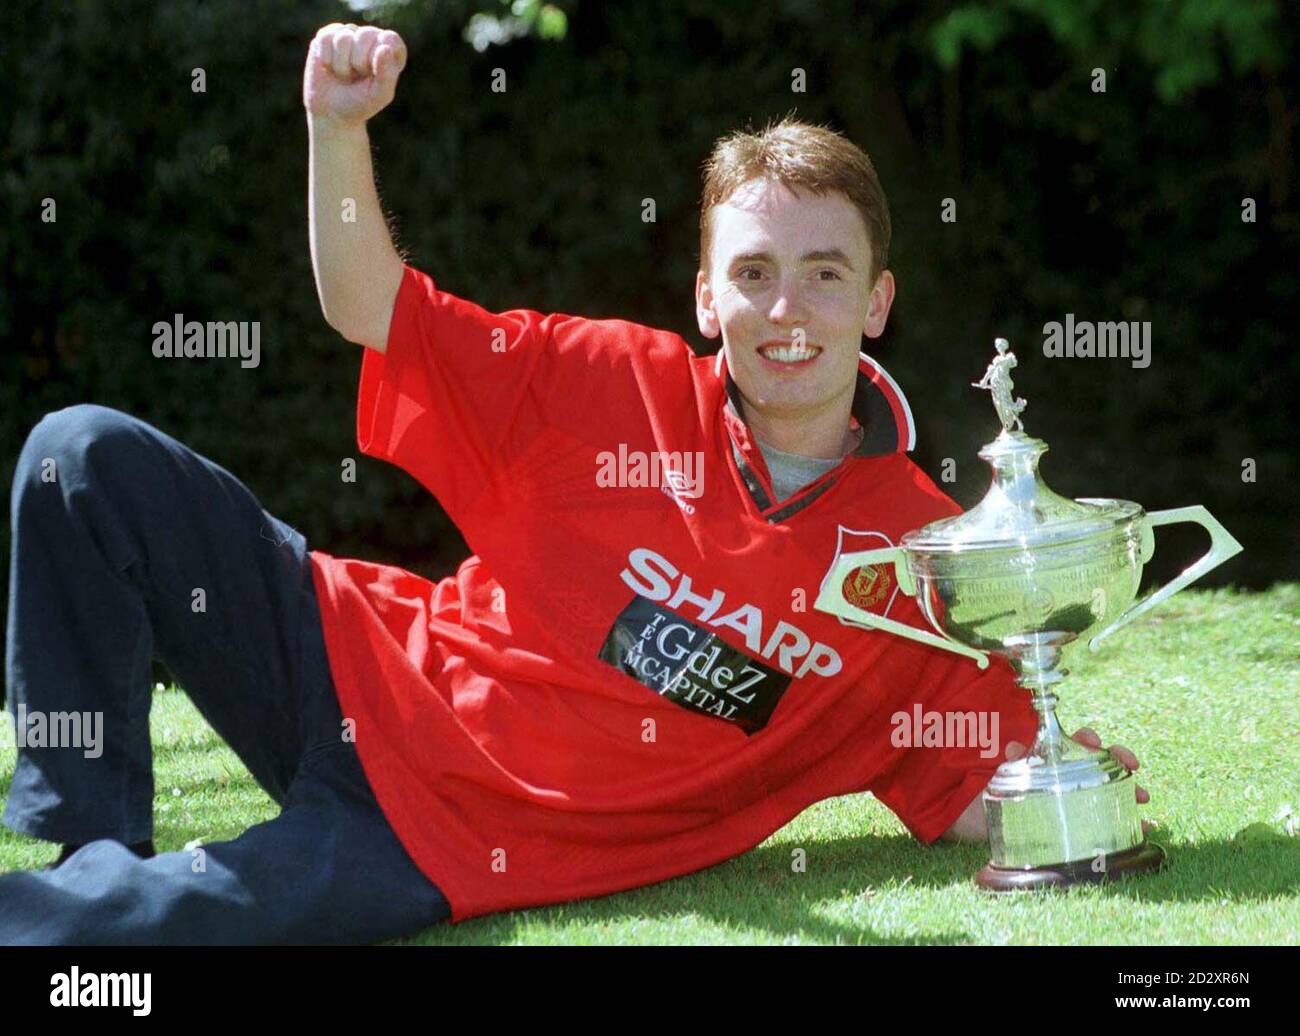 New Snooker world champion and Manchester United fan Ken Doherty celebrating at Sheffields Swallow Hotel today following last nights (Monday) victory in the Embassy World Championship